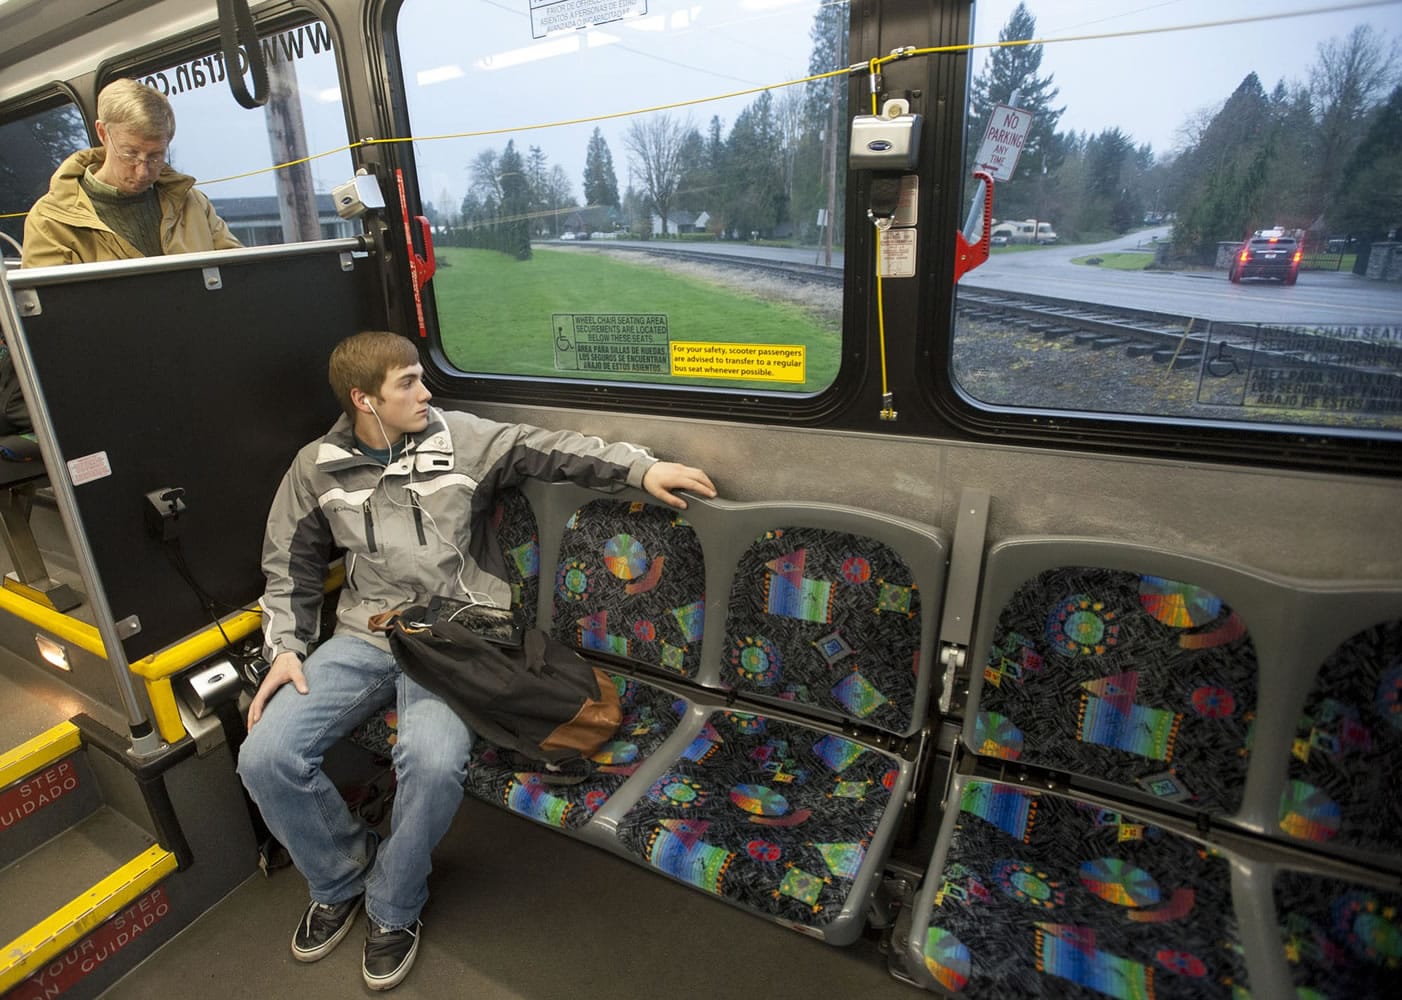 Student james West rides a bus to Yacolt Monday March 23, 2015. The No. 47 bus between Battle Ground and Yacolt, one of C-Tran's least-used routes.